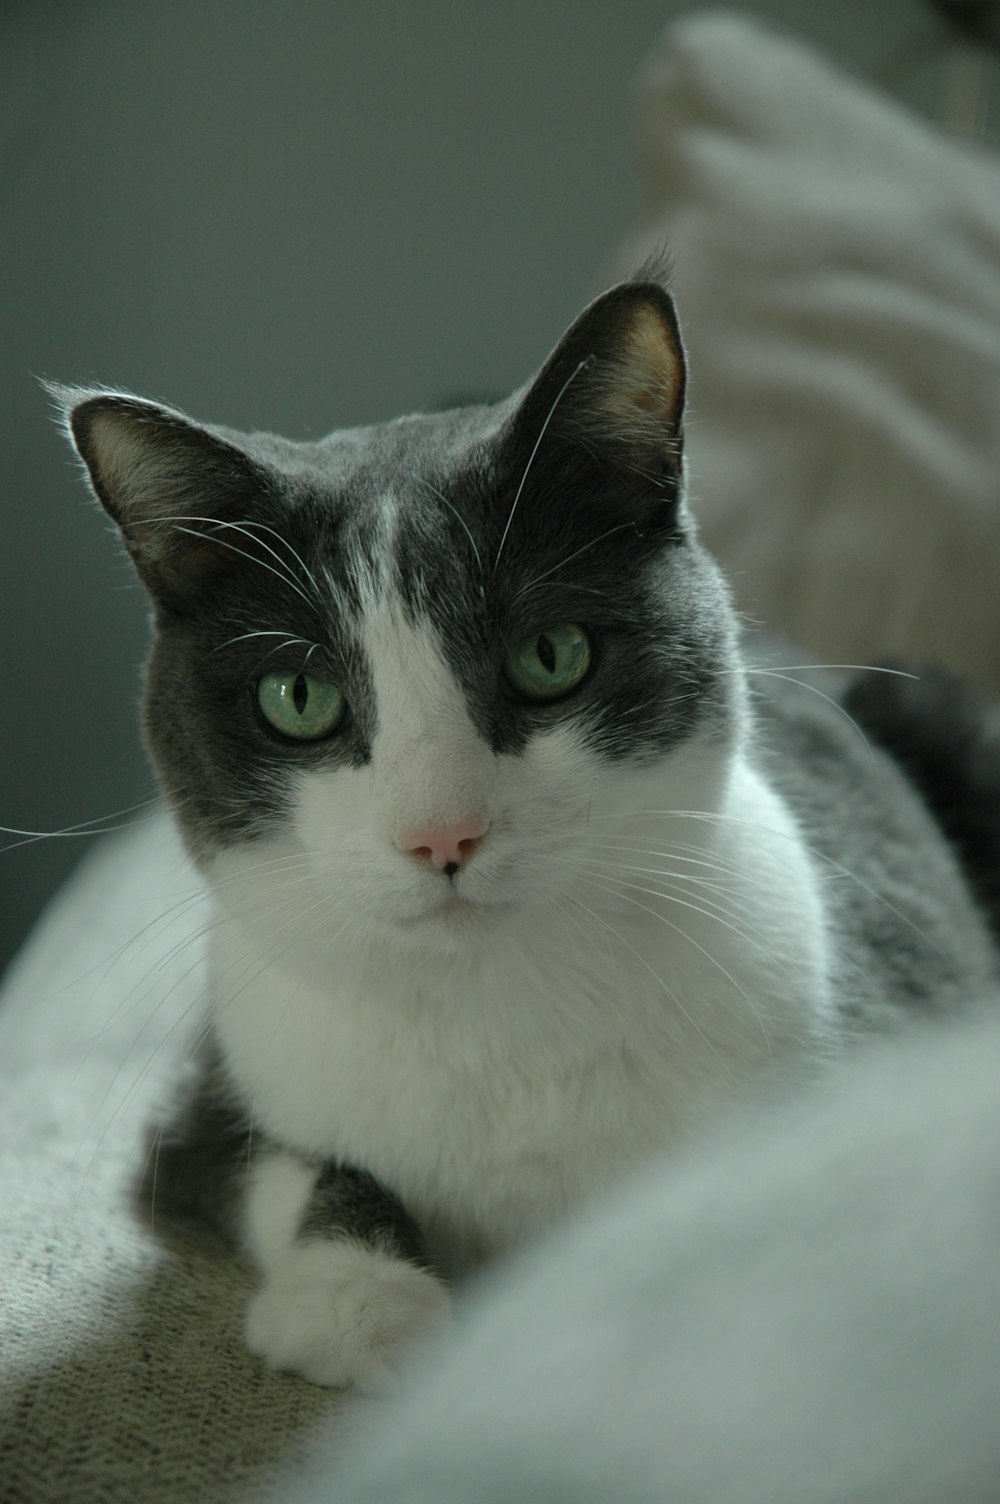 a black and white cat with green eyes sitting on a bed